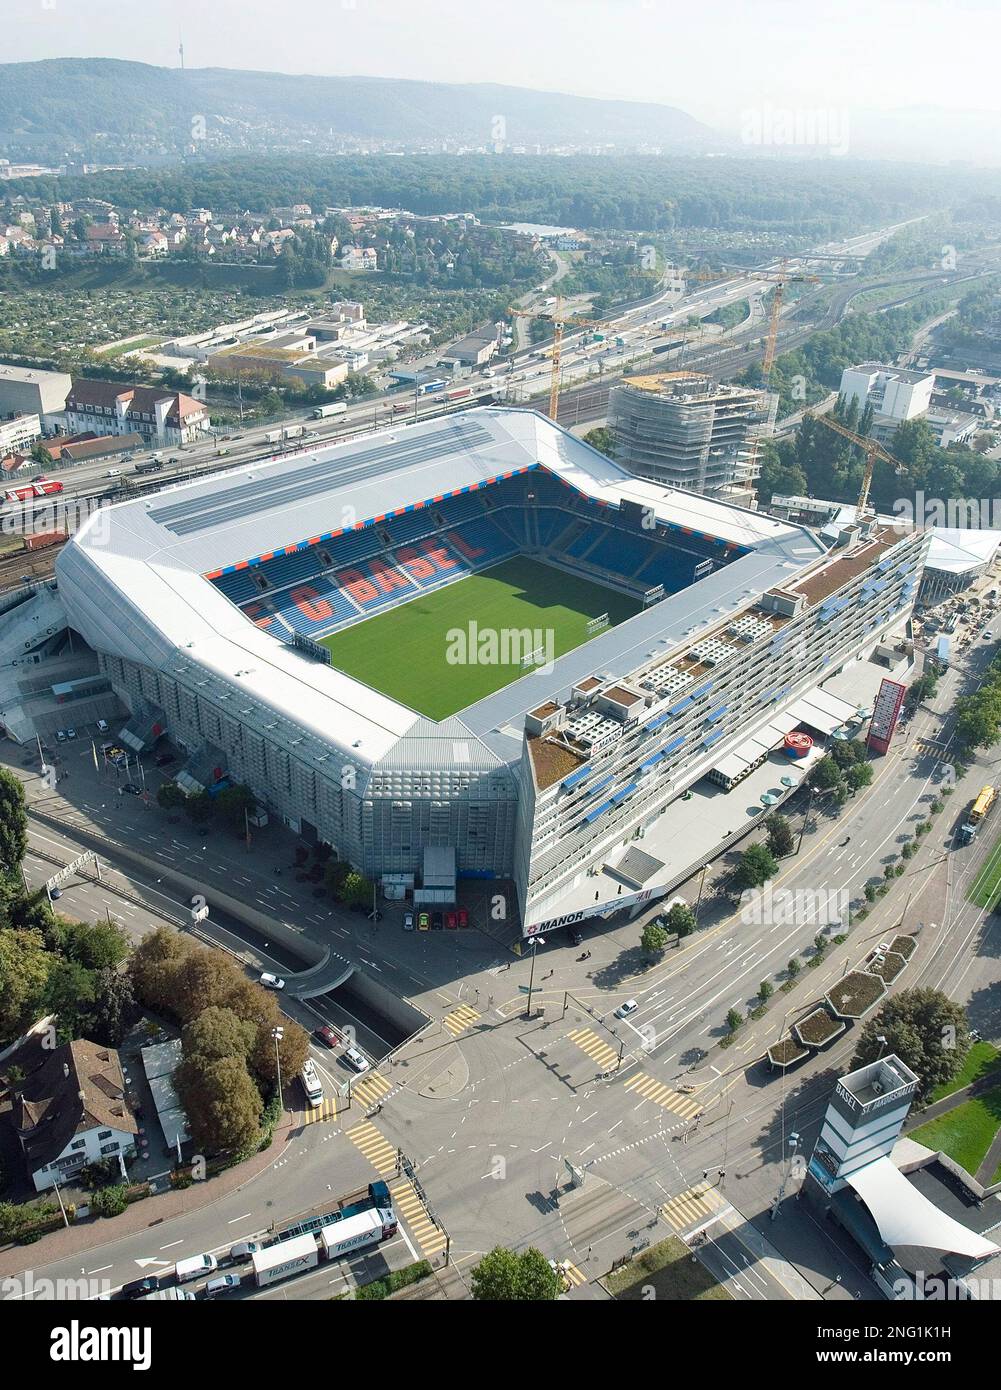 An aerial view of the soccer stadium St. Jakob Park in Basel, Switzerland,  Sept 17, 2007. The St. Jakob-Park (Joggeli) with a capacity of 42,500 seats  will be one of the eight